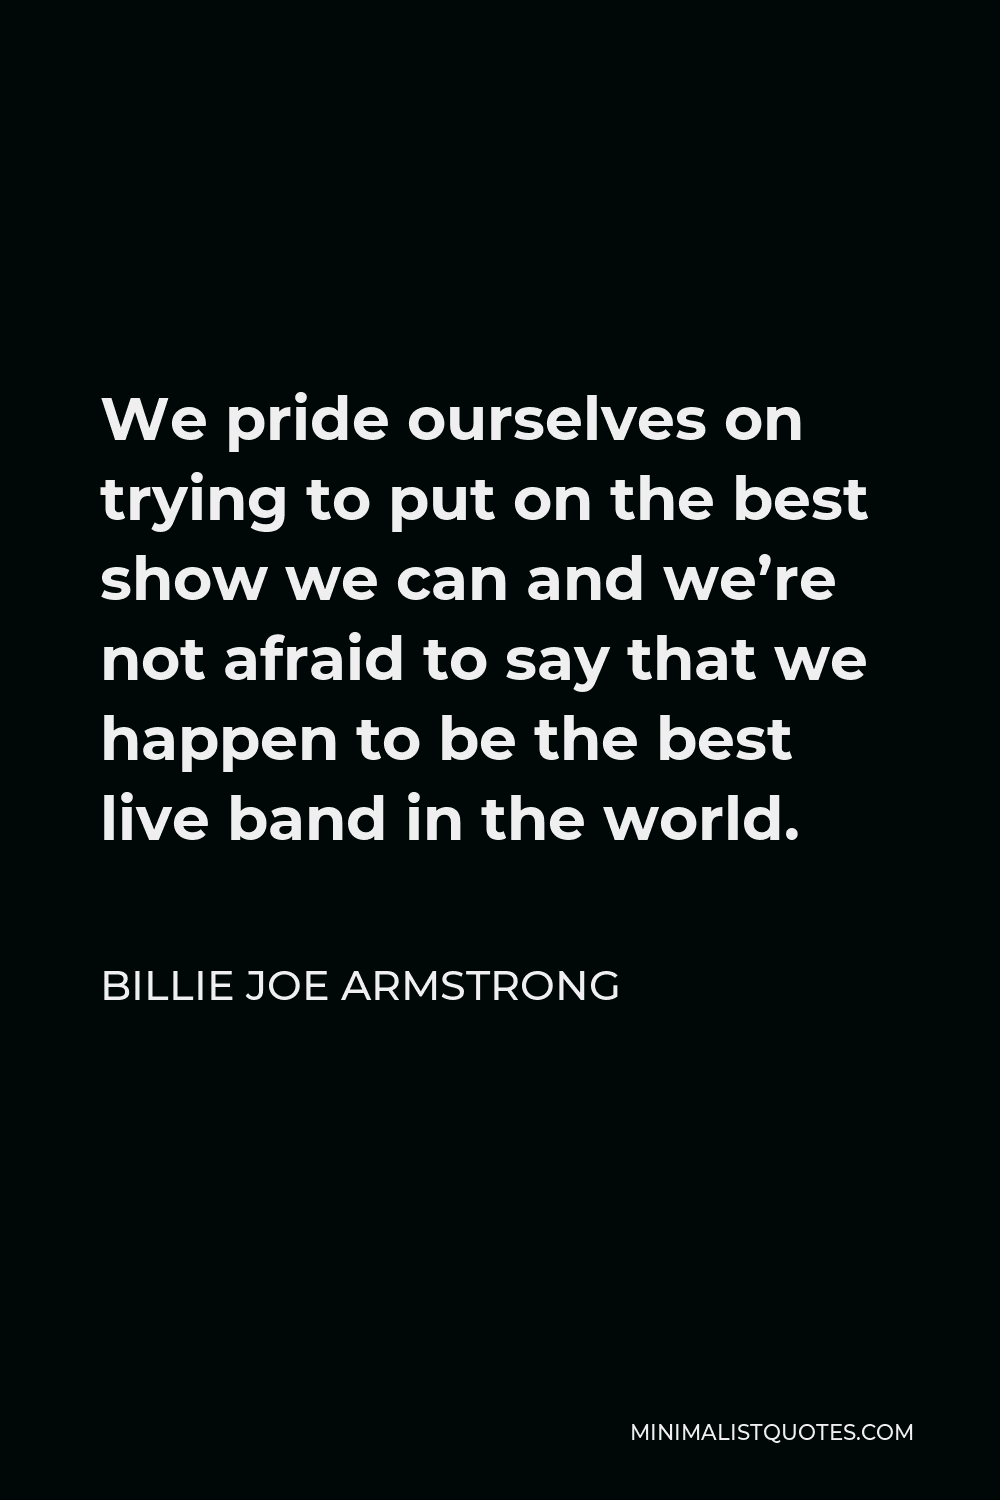 Billie Joe Armstrong Quote - We pride ourselves on trying to put on the best show we can and we’re not afraid to say that we happen to be the best live band in the world.